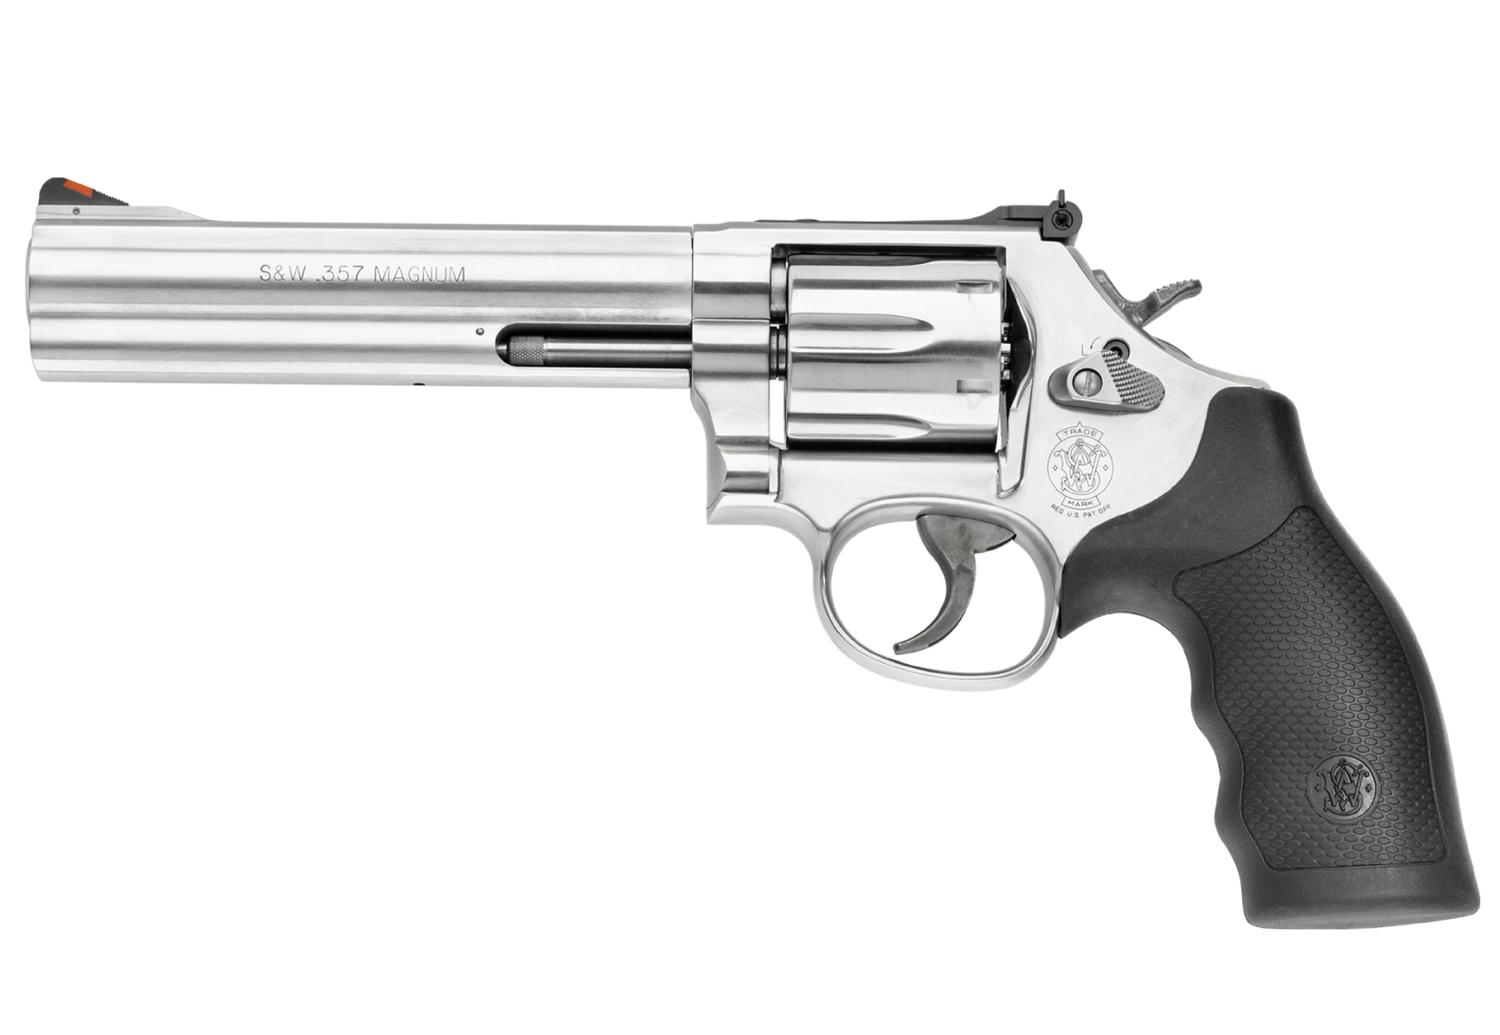  Model 686 Distinguished Combat Magnum .357mag 6rd 6in - Satin Stainless